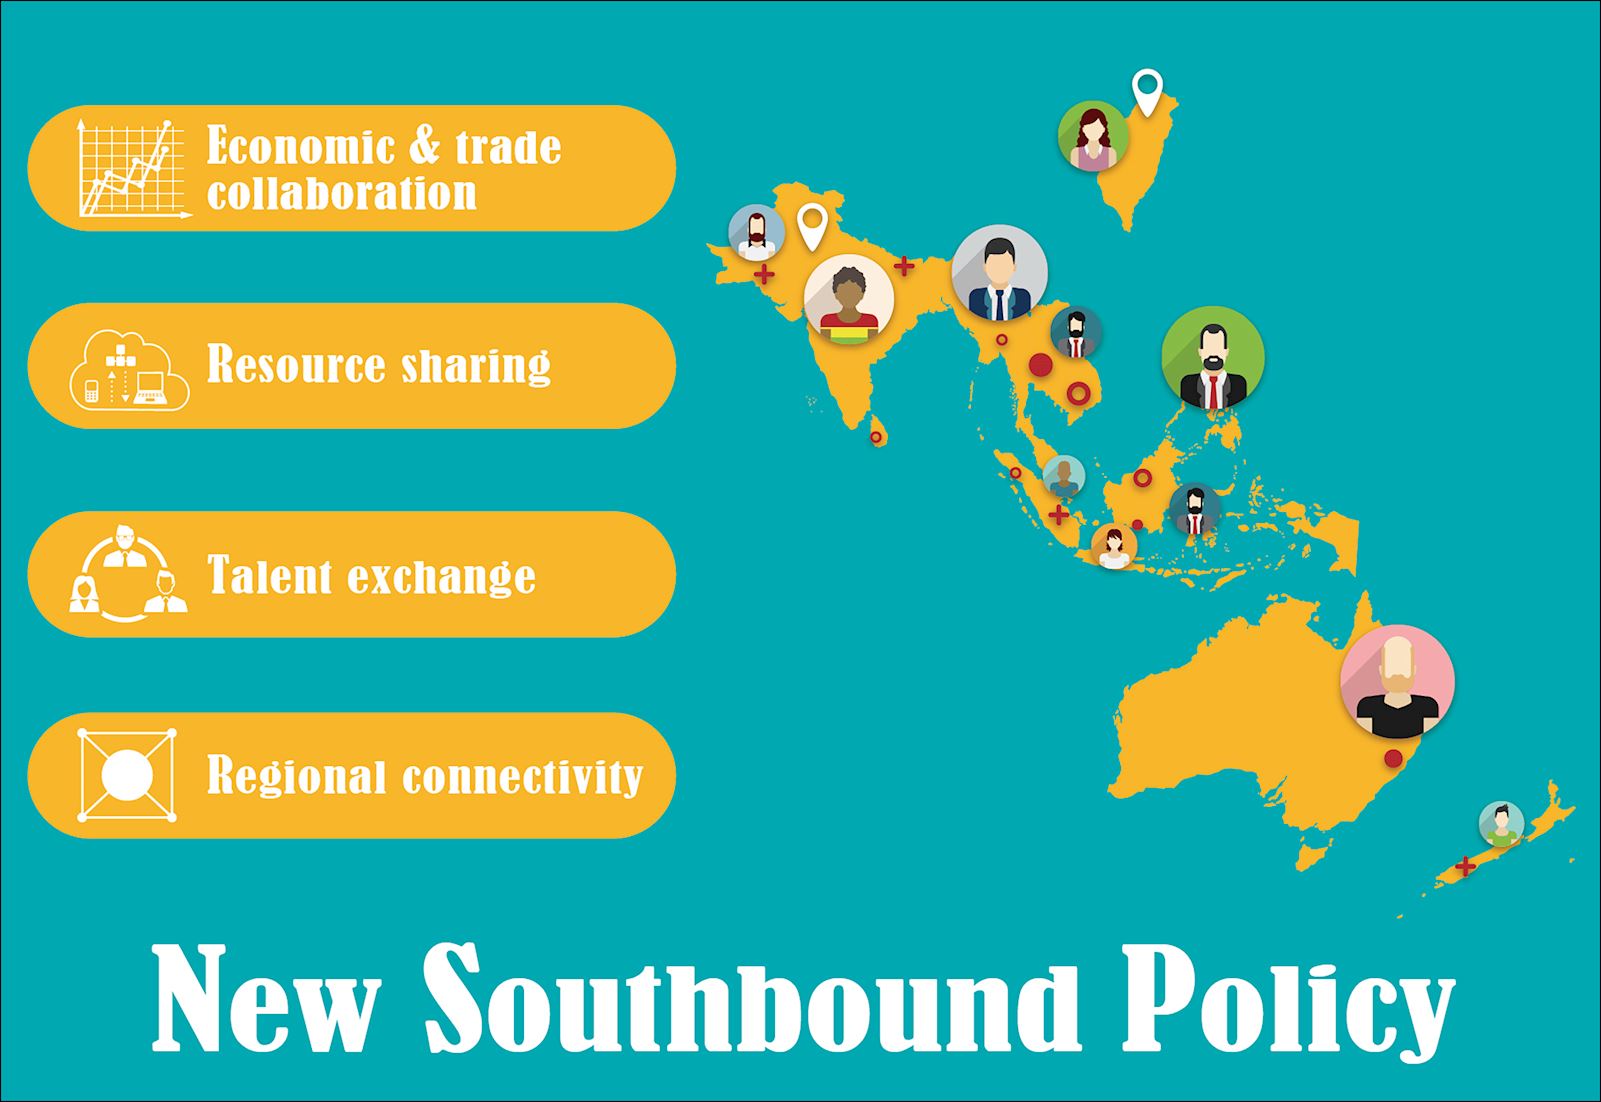 The plan consists of four main components: Economic and trade collaboration, Resource sharing, Talent exchange, Regional Connectivity.